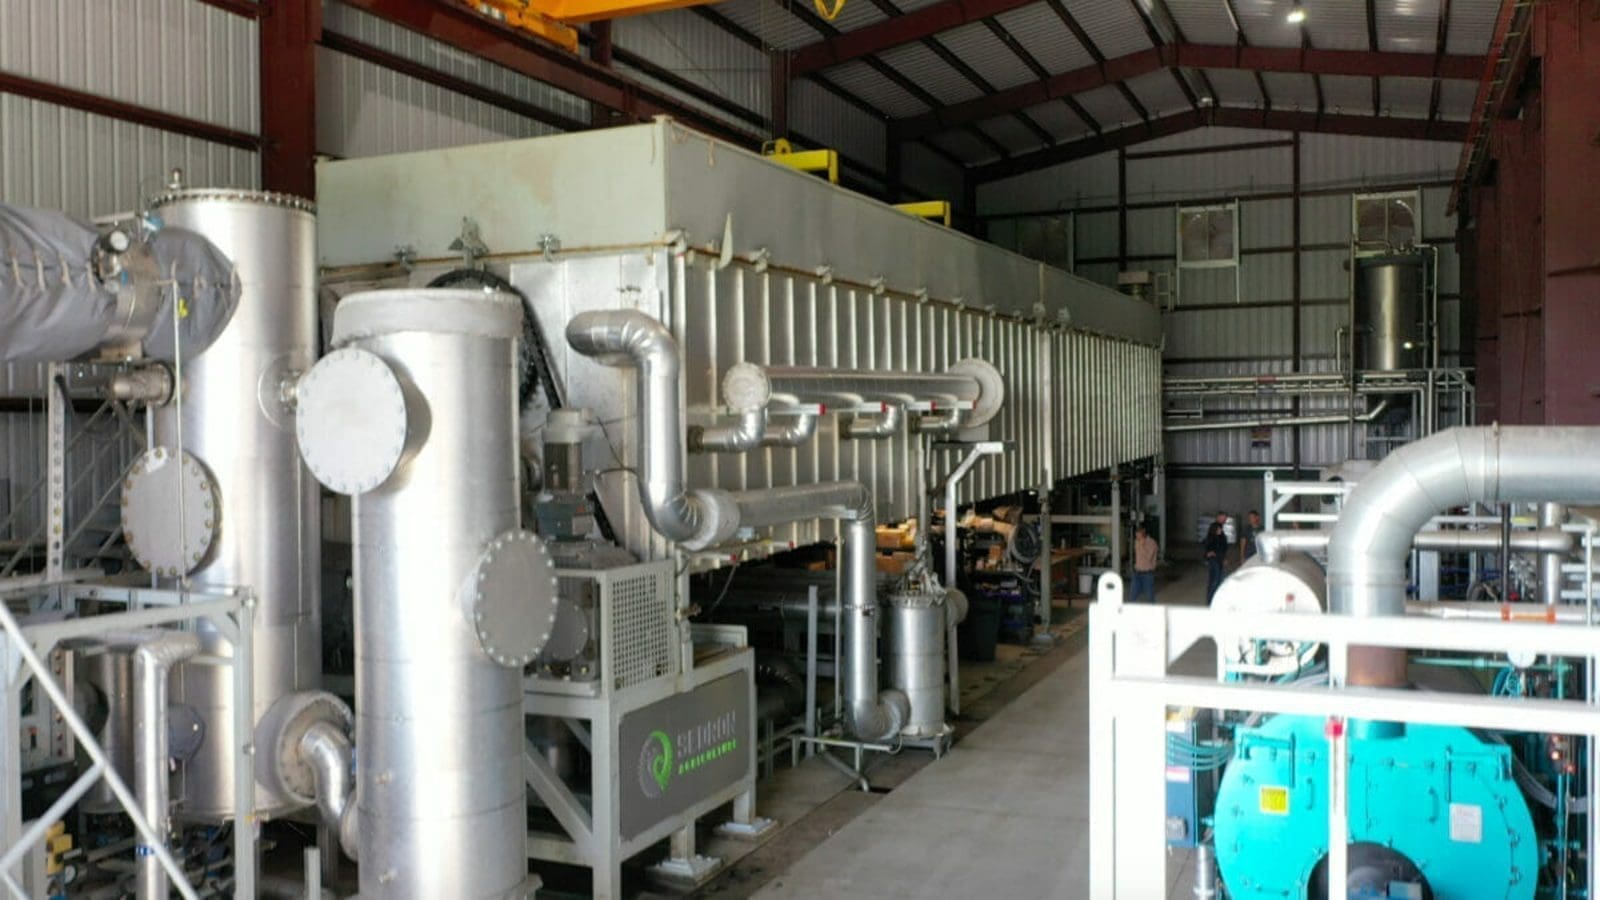 Sedron’s Varcor system picks up pace in strengthening sustainability in US dairy farms